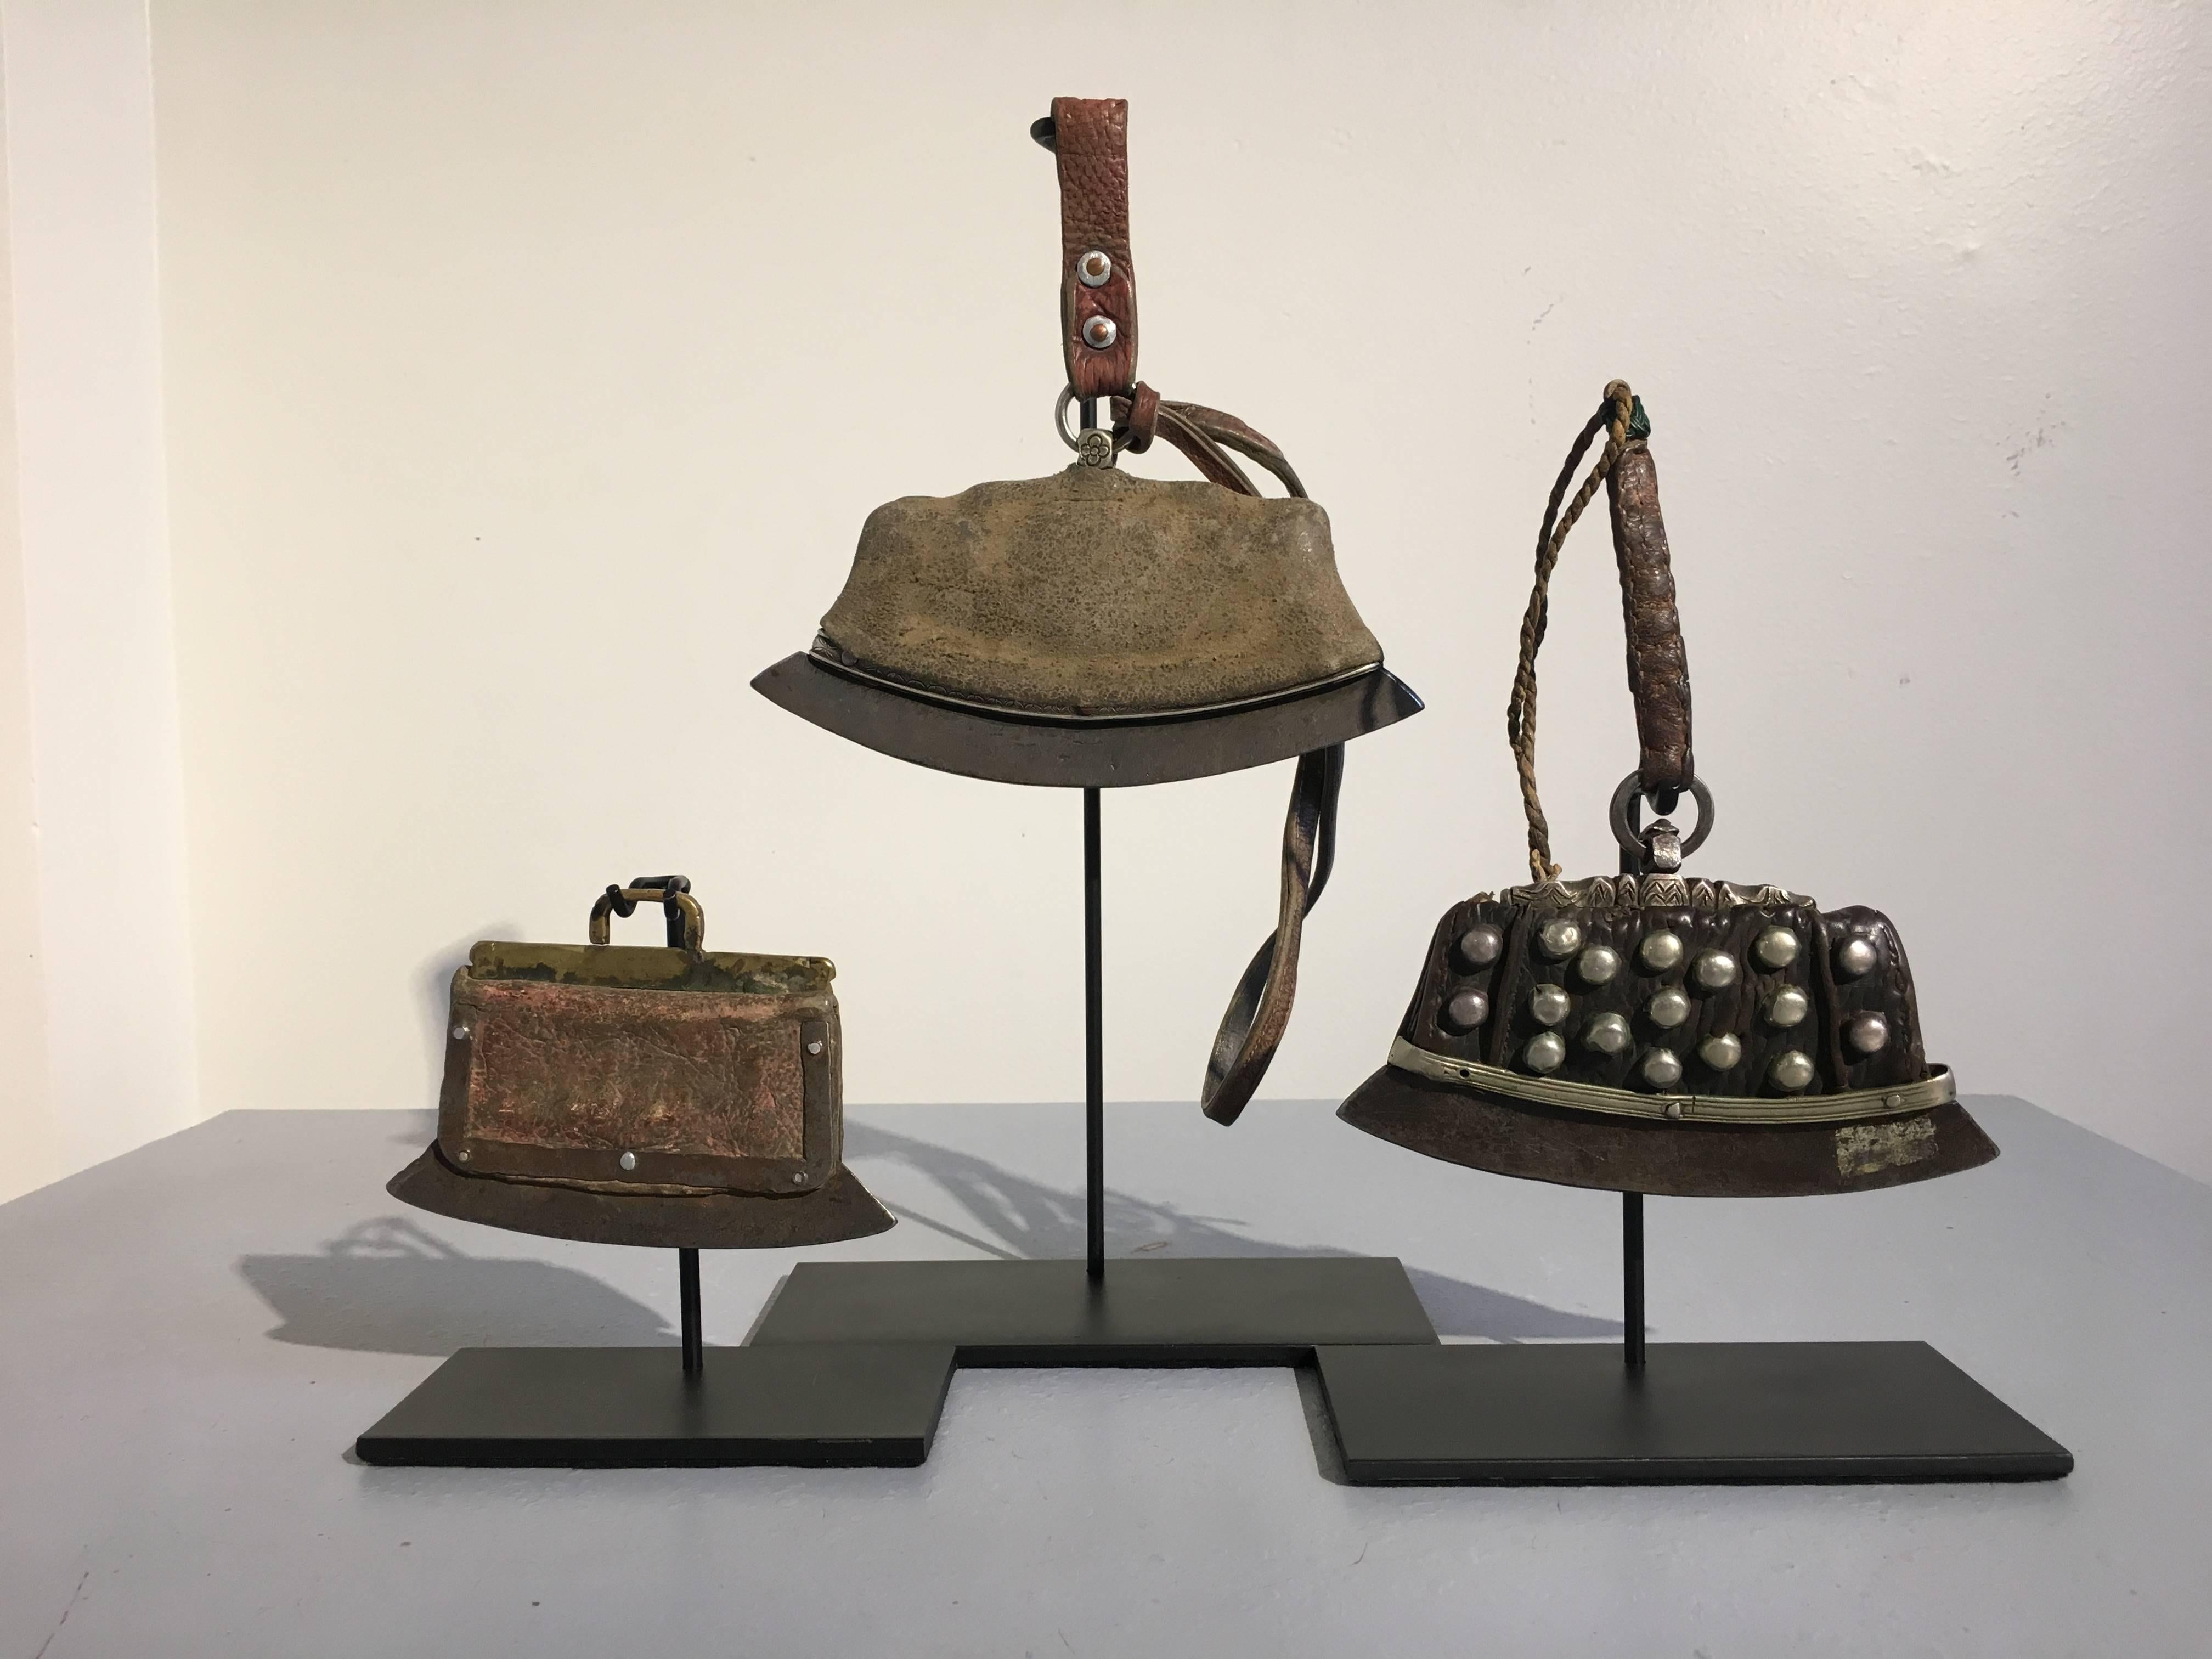 A very nice group of mounted early 19th century Tibetan leather and silver purses. The purses originally used to carry tinder and flint, with the two larger purses still containing fire starting materials. The pouches are made from leather with a